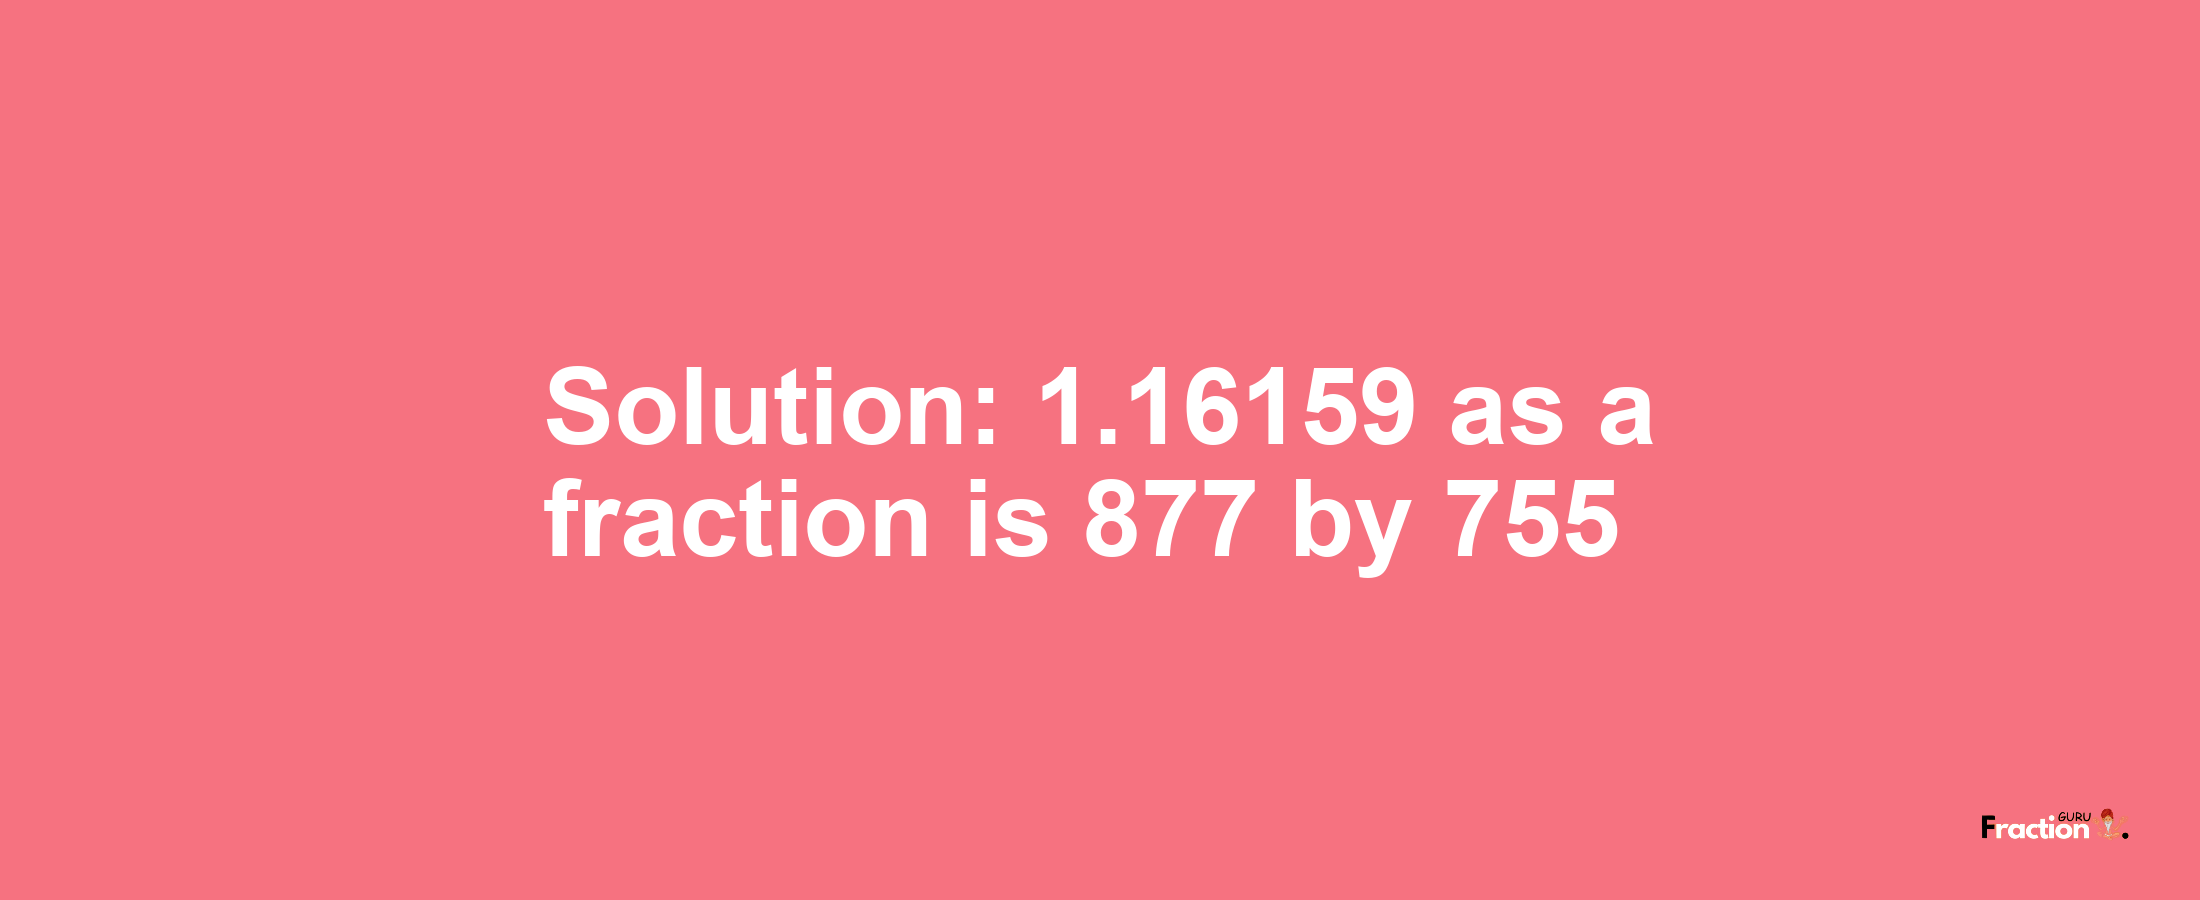 Solution:1.16159 as a fraction is 877/755